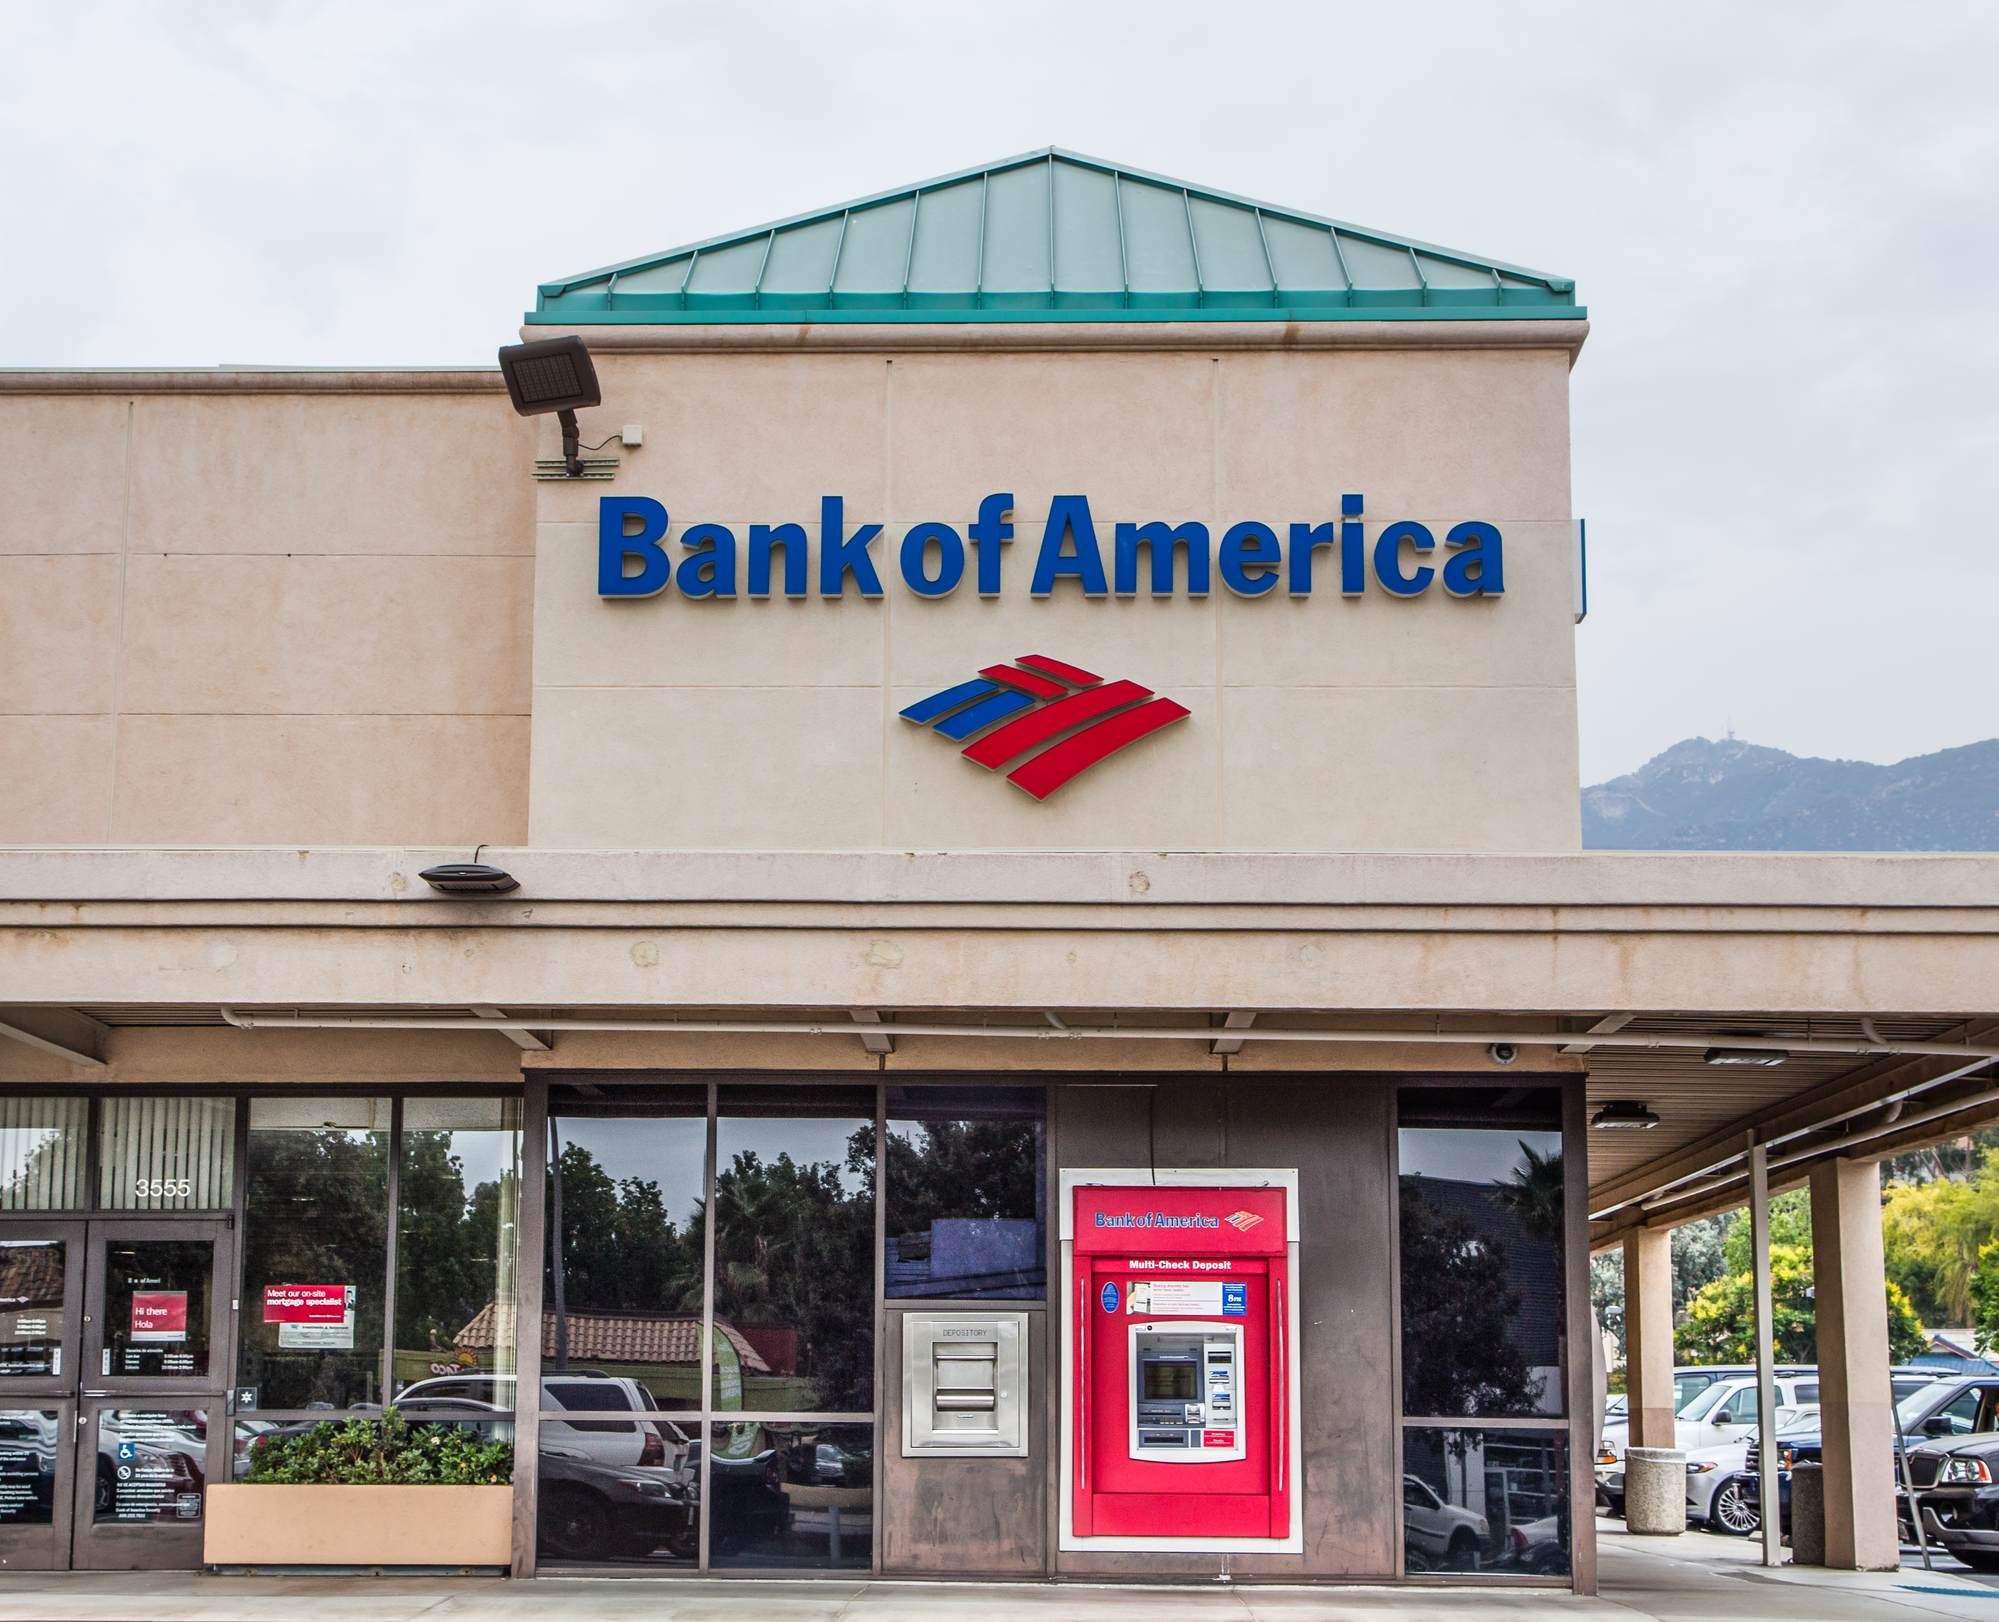 Bank of America has been accused of misuing PPP funds.